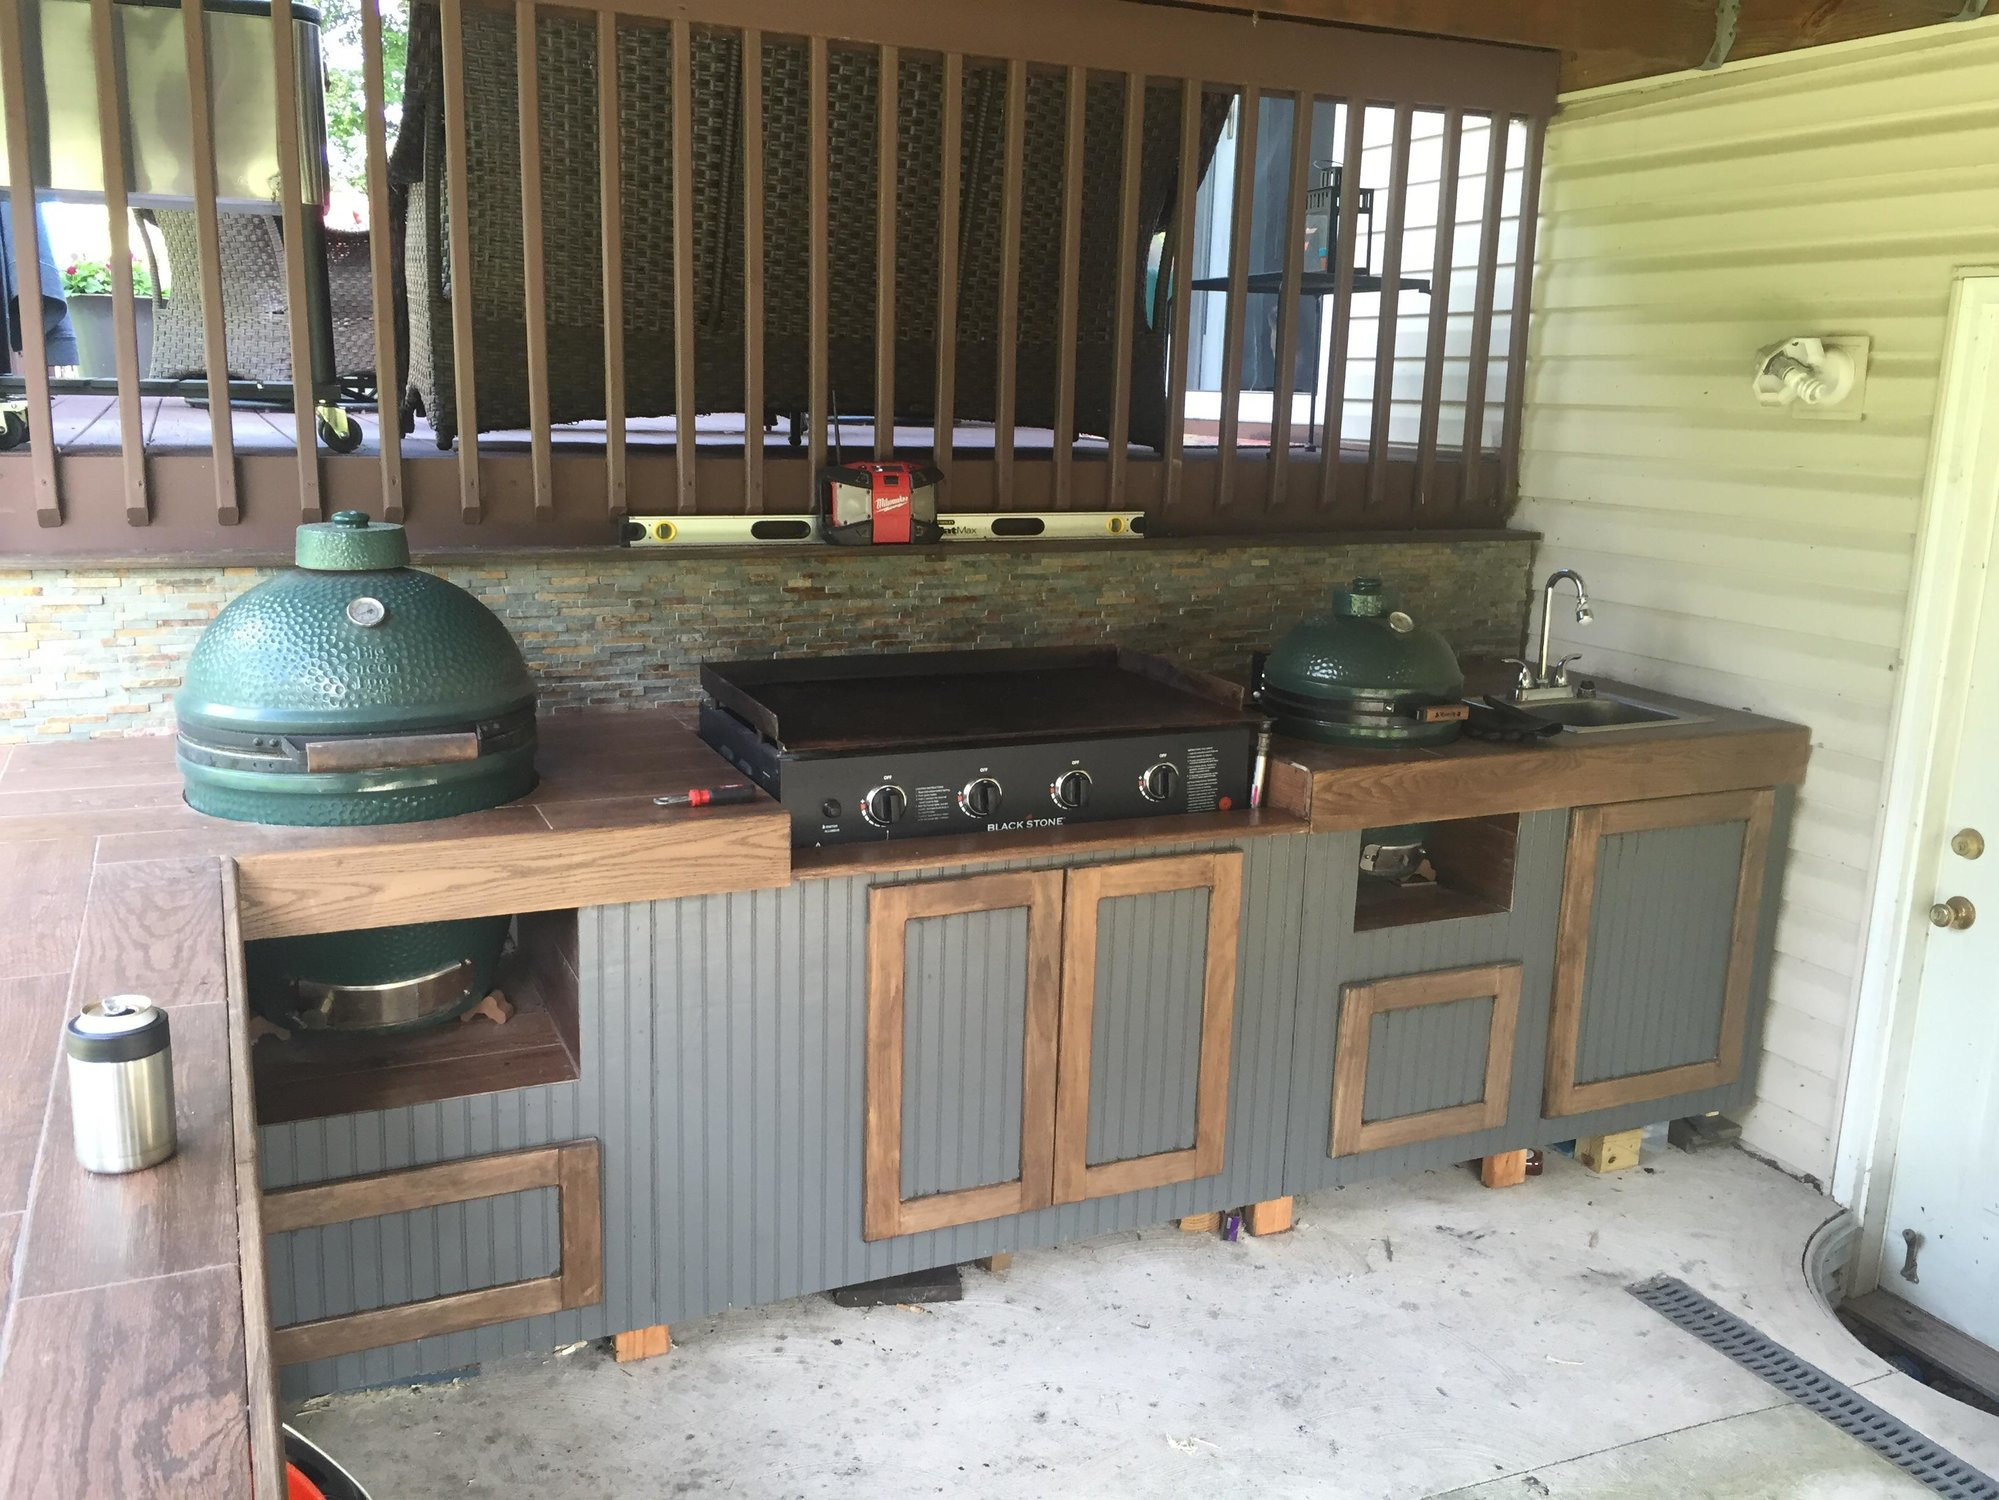 Outdoor Kitchen Griddle
 It s official the outdoor kitchen has started — Big Green